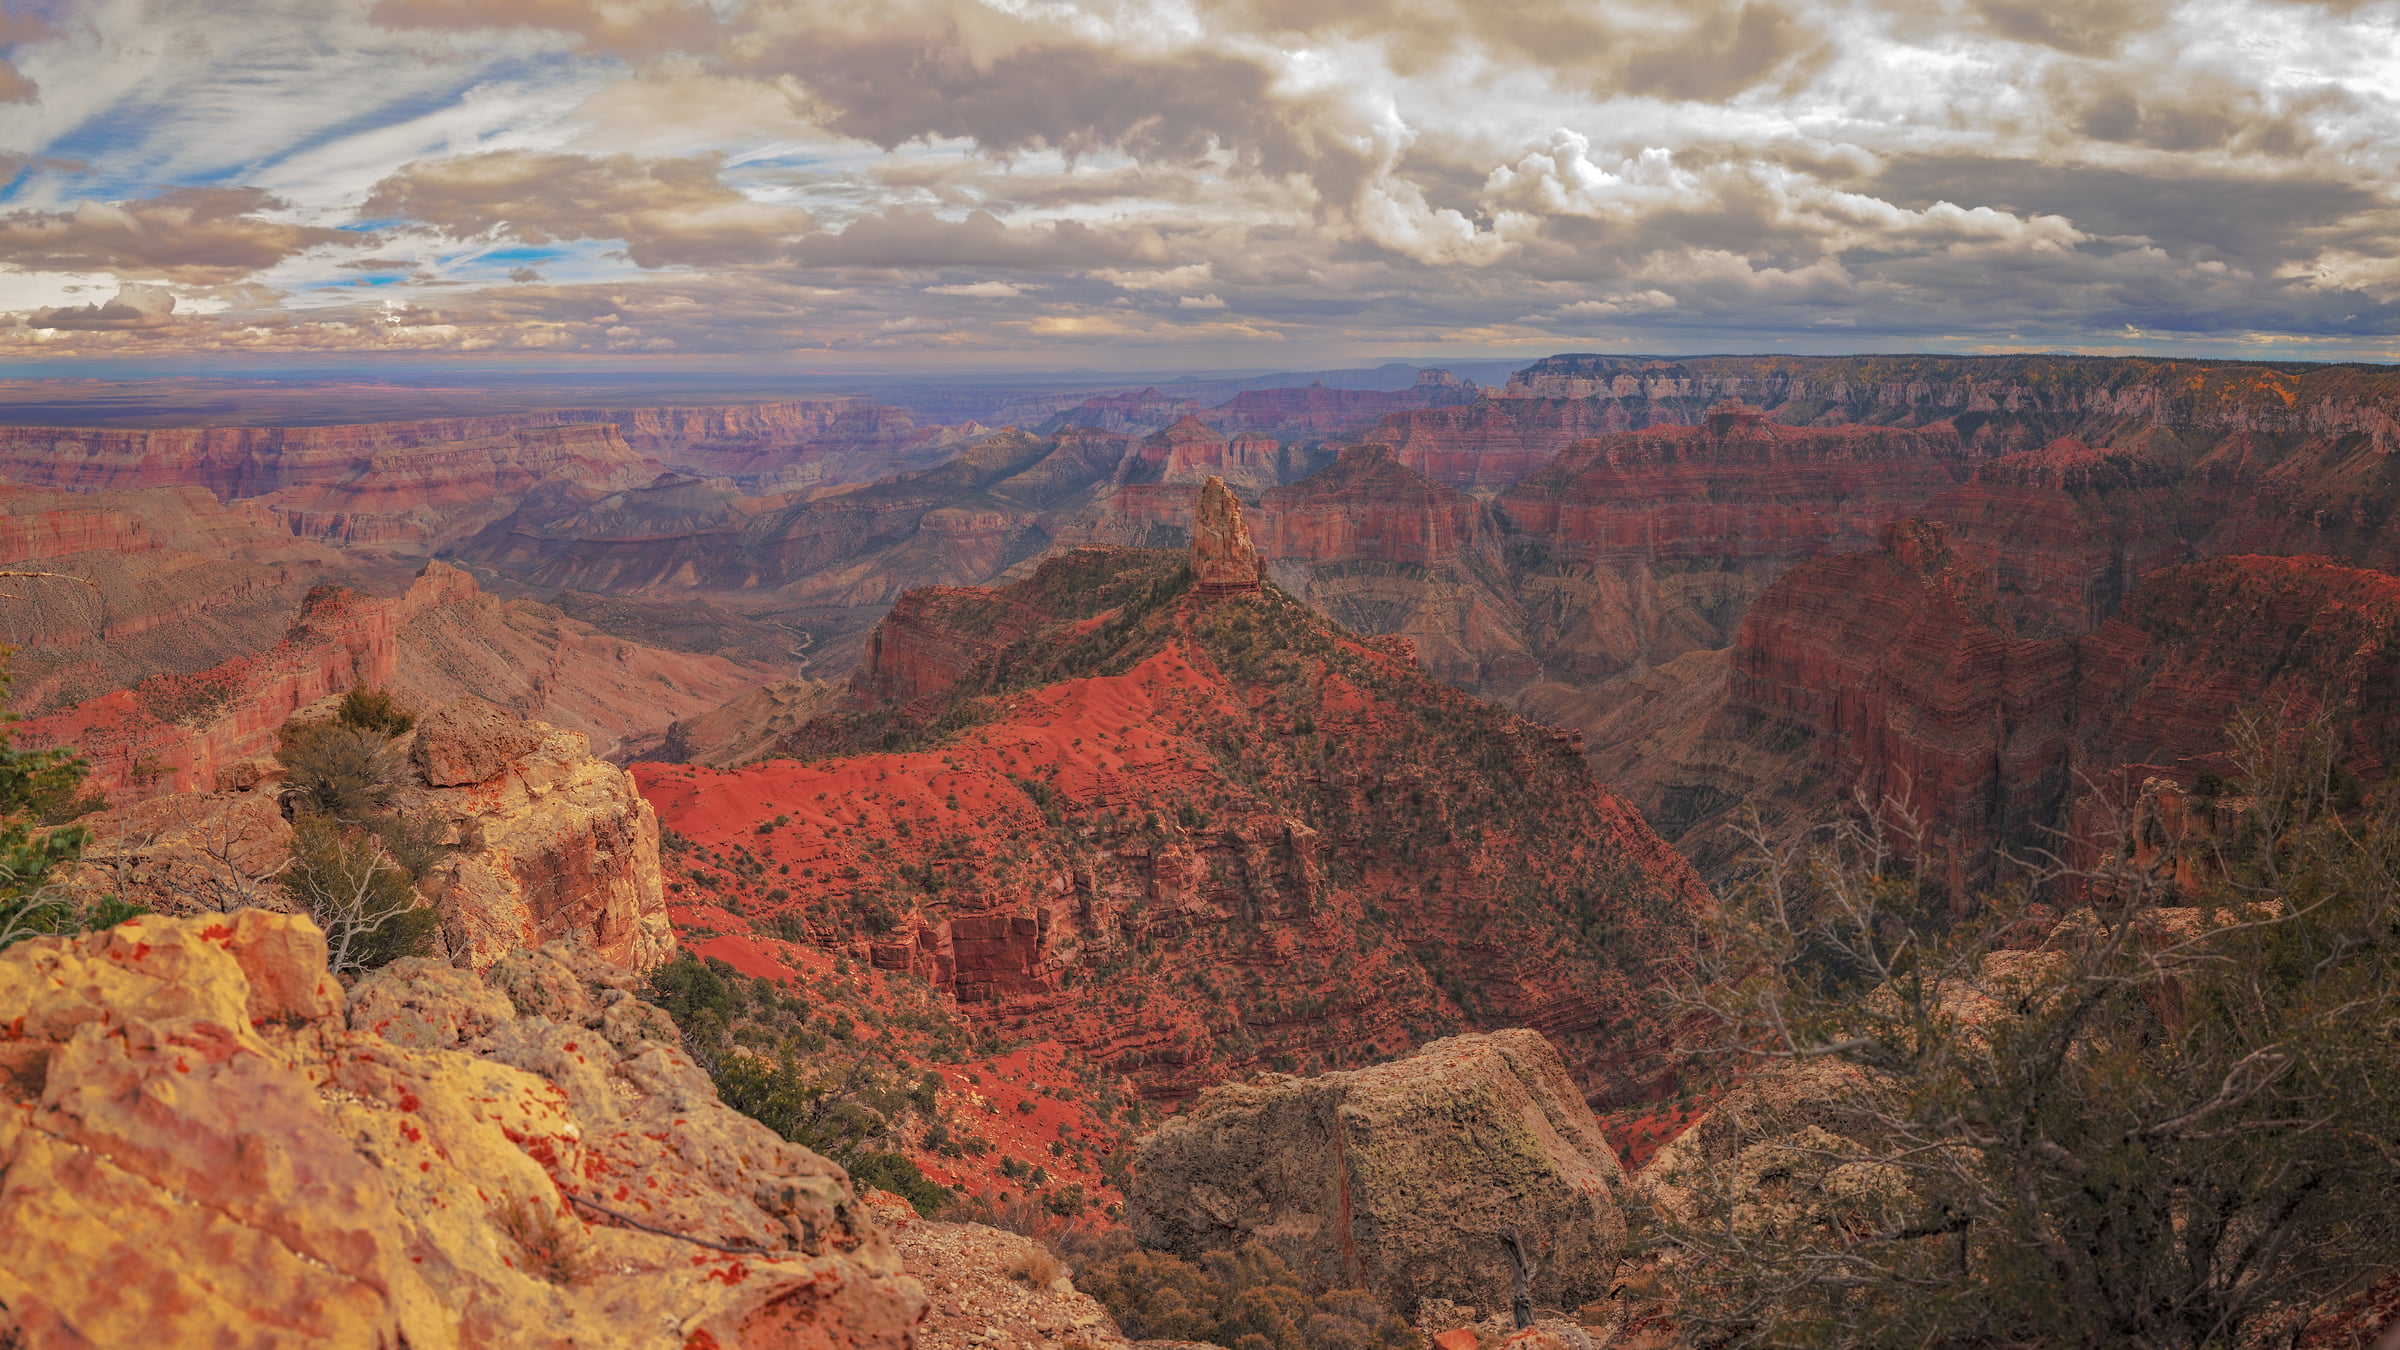 955 megapixels! A very high resolution, large-format VAST photo print of the Grand Canyon; landscape photograph created by John Freeman in Point Imperial, North Rim Grand Canyon, Arizona